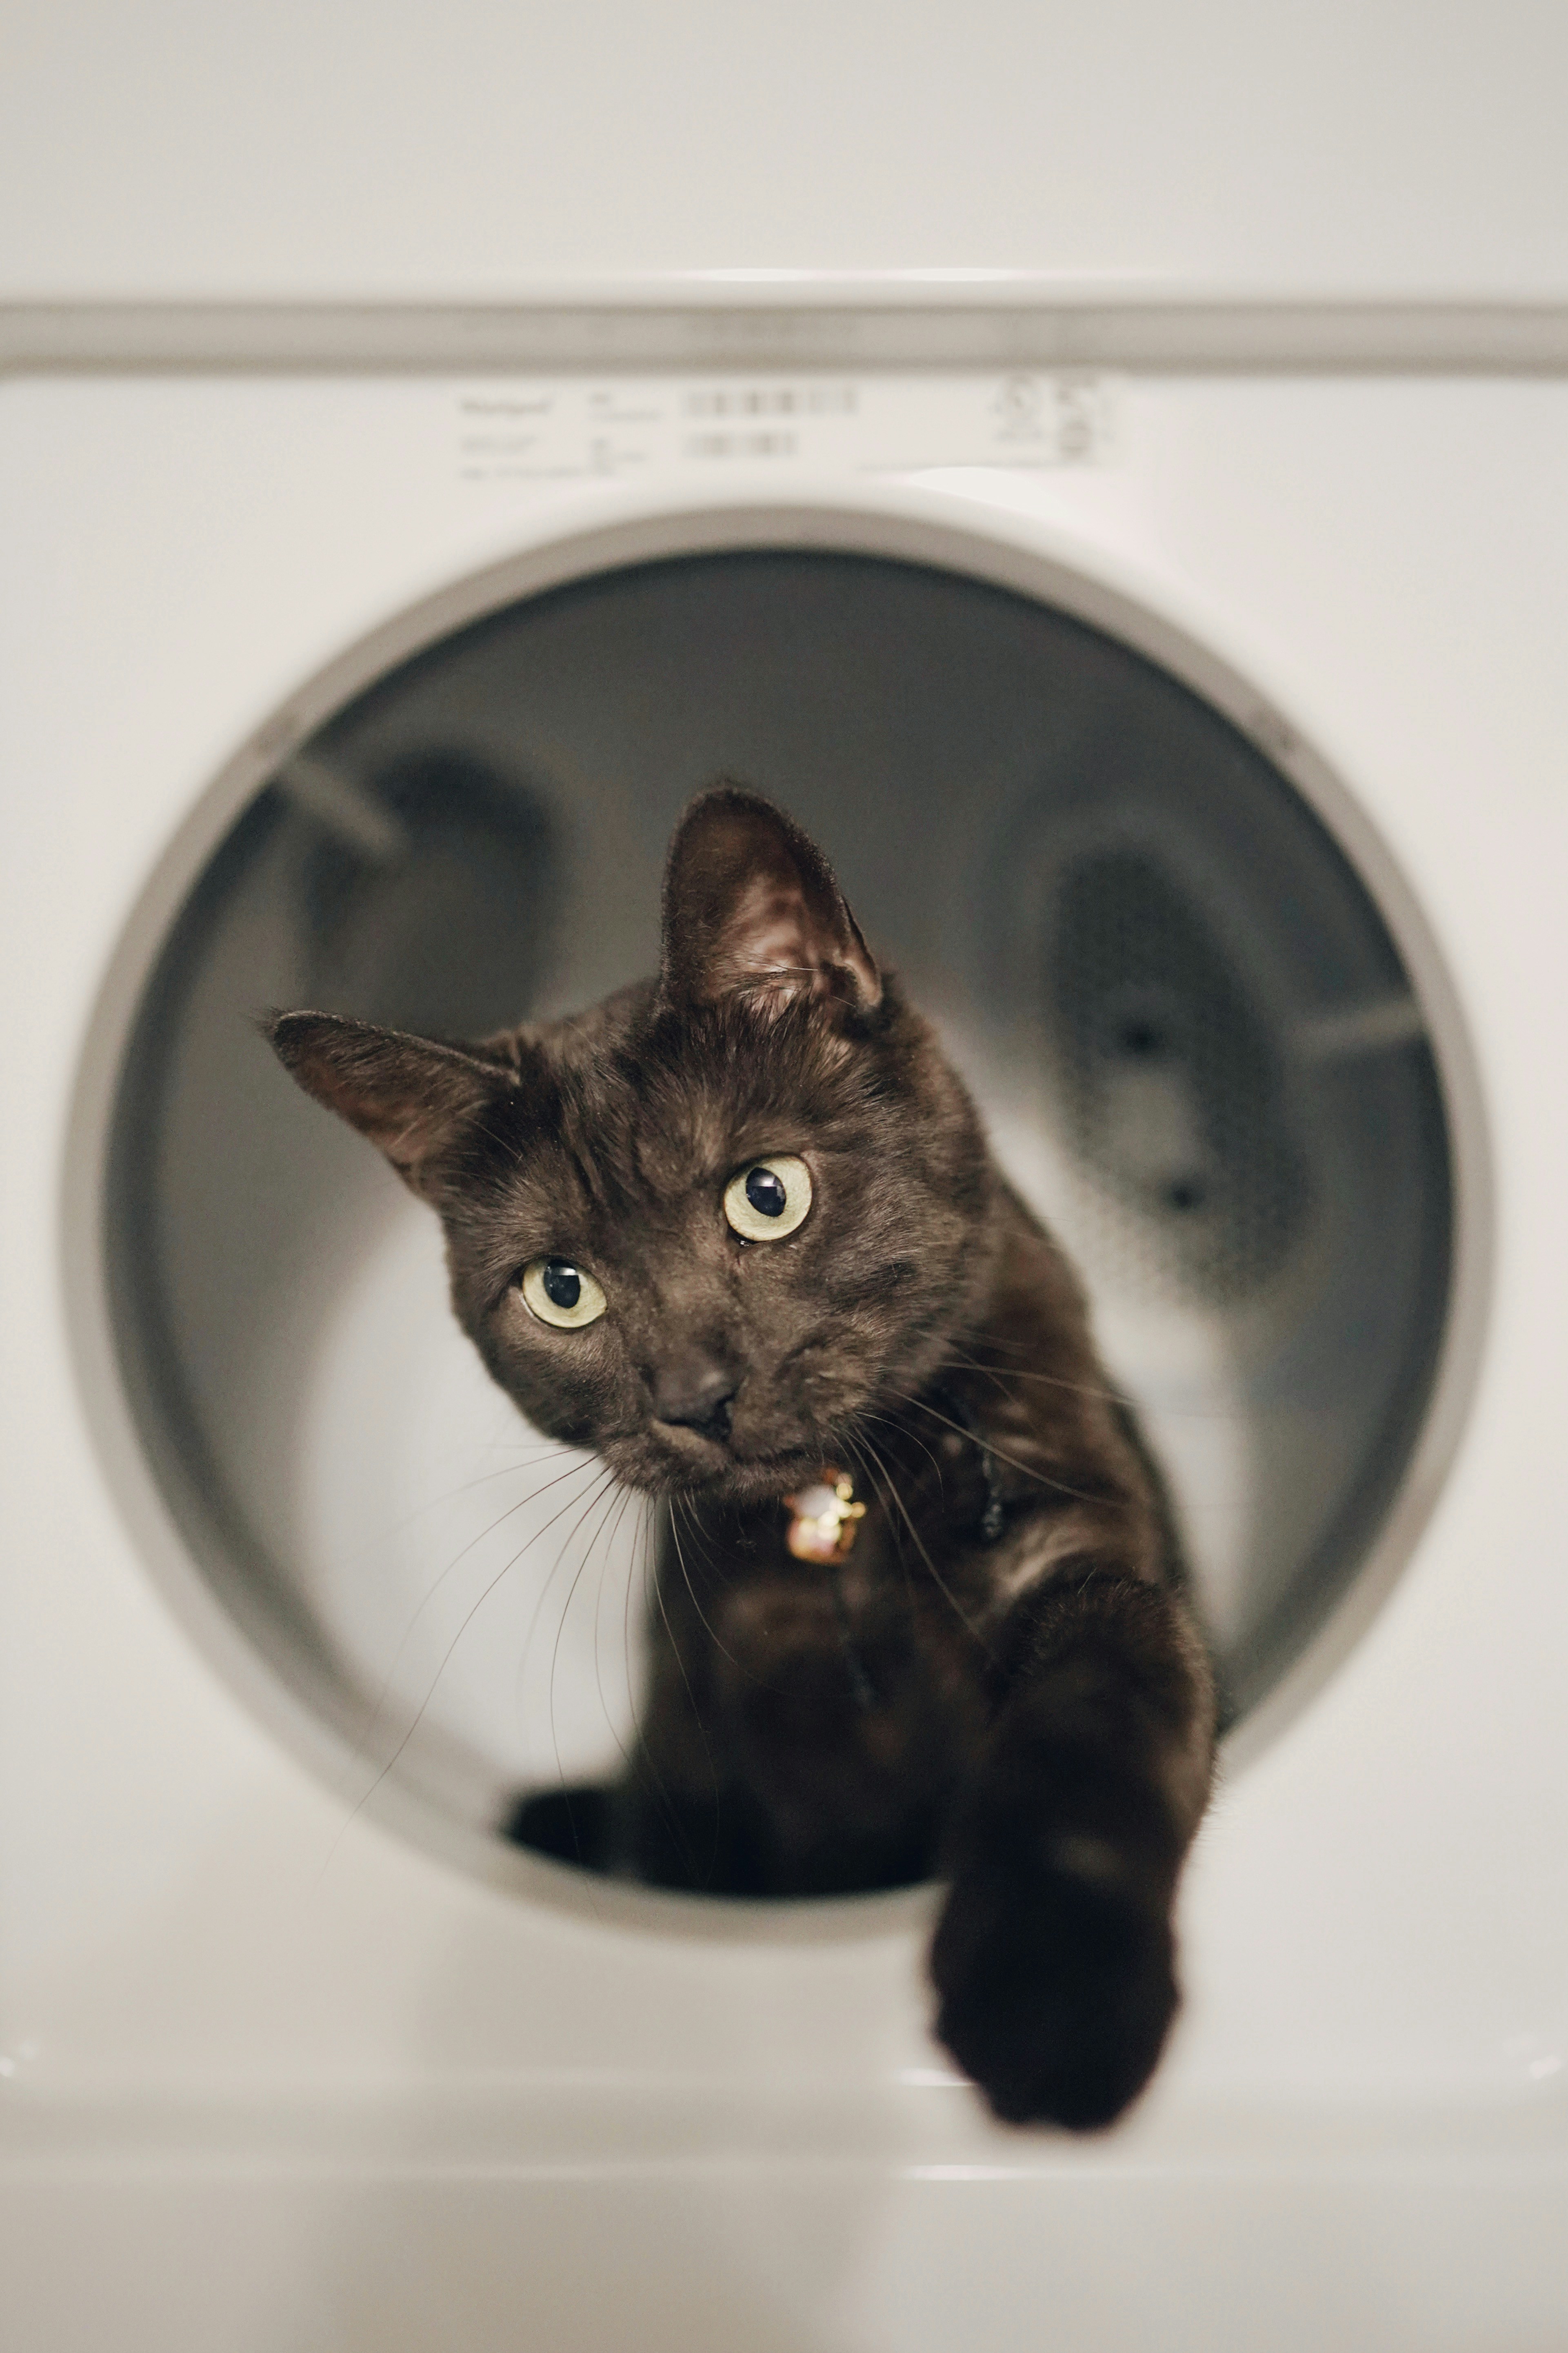 Washer cat